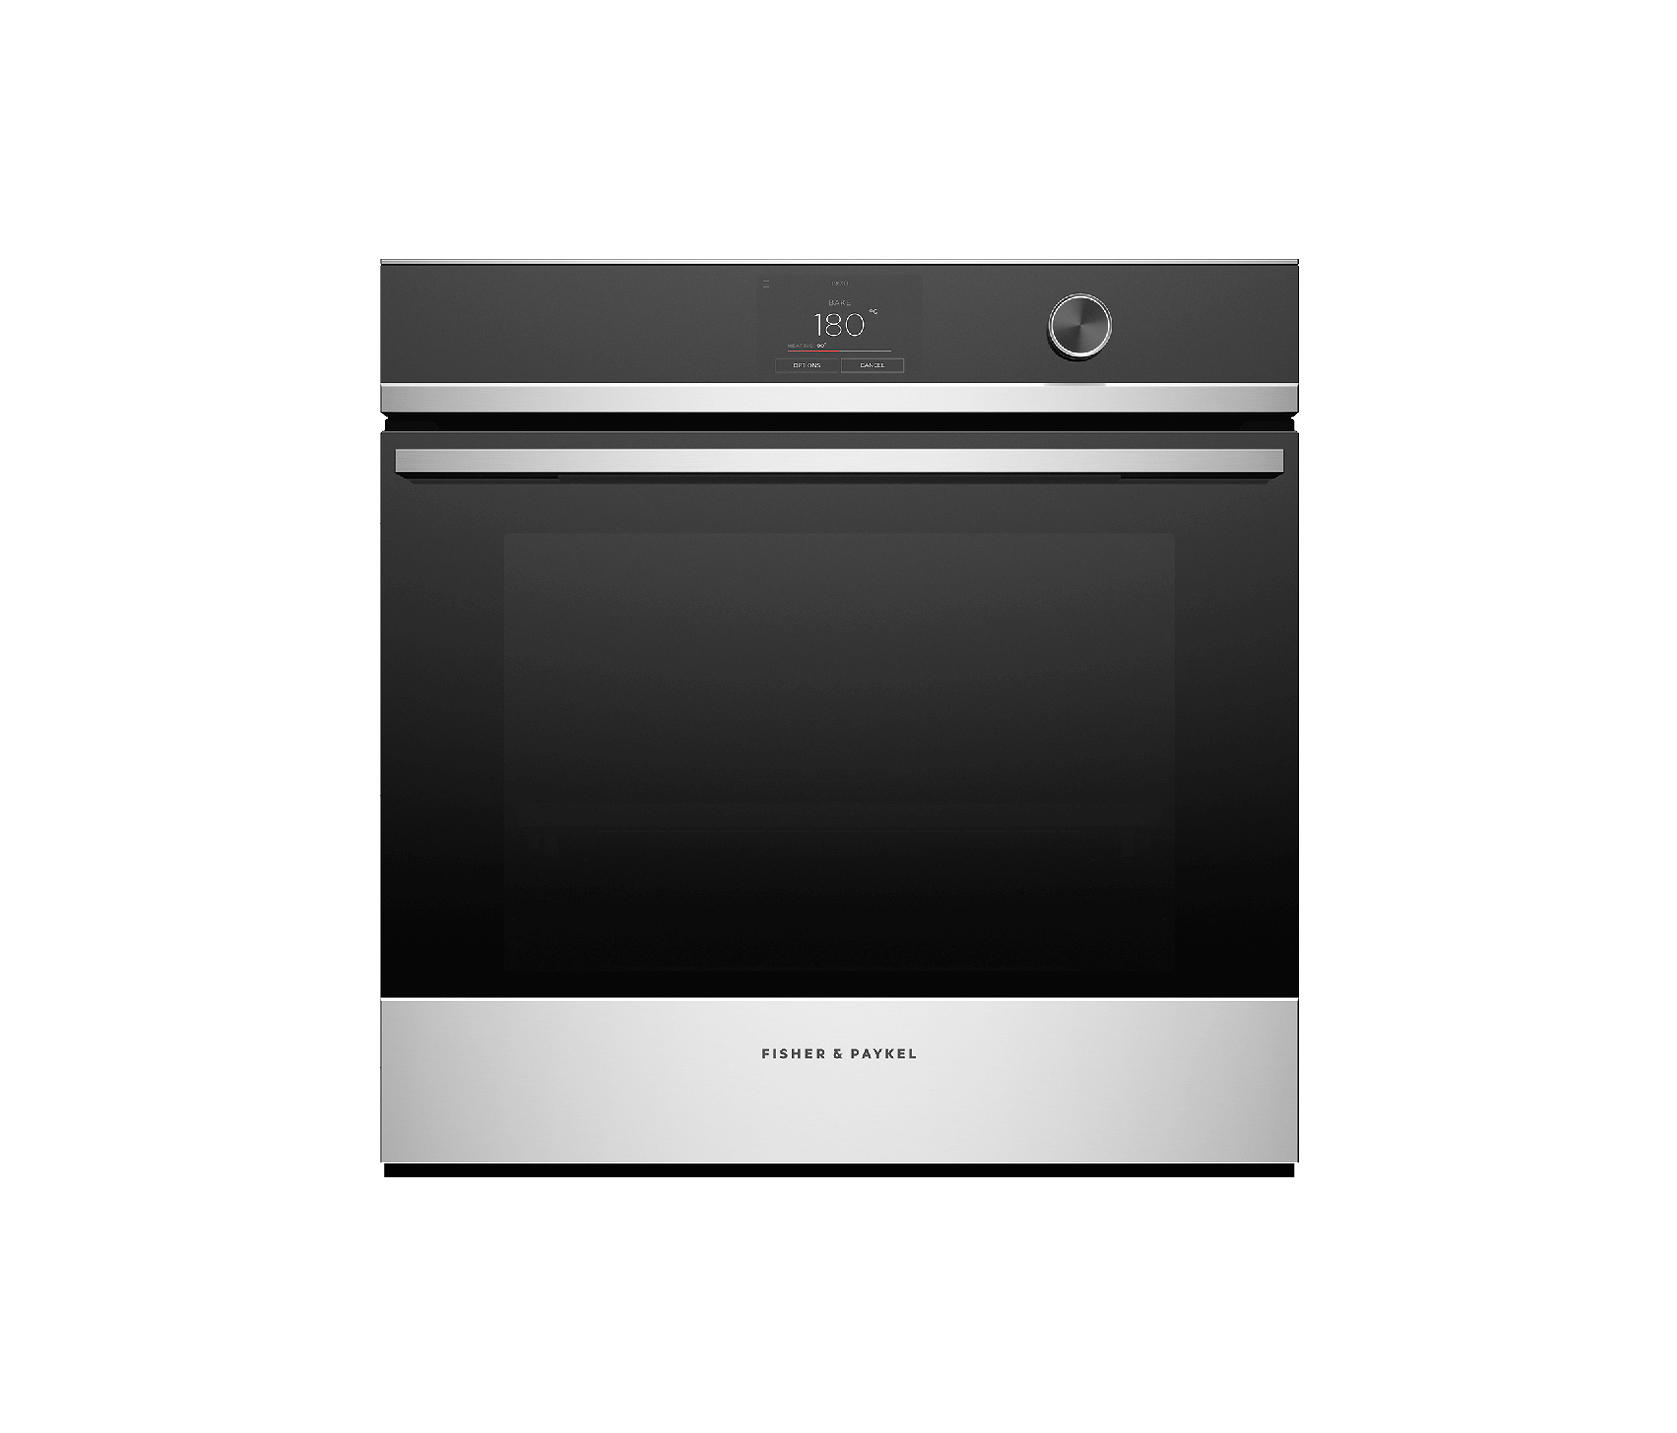 FISHER PAYKEL OB60SDPTX1 Oven 60cm16 Function Selfcleaning